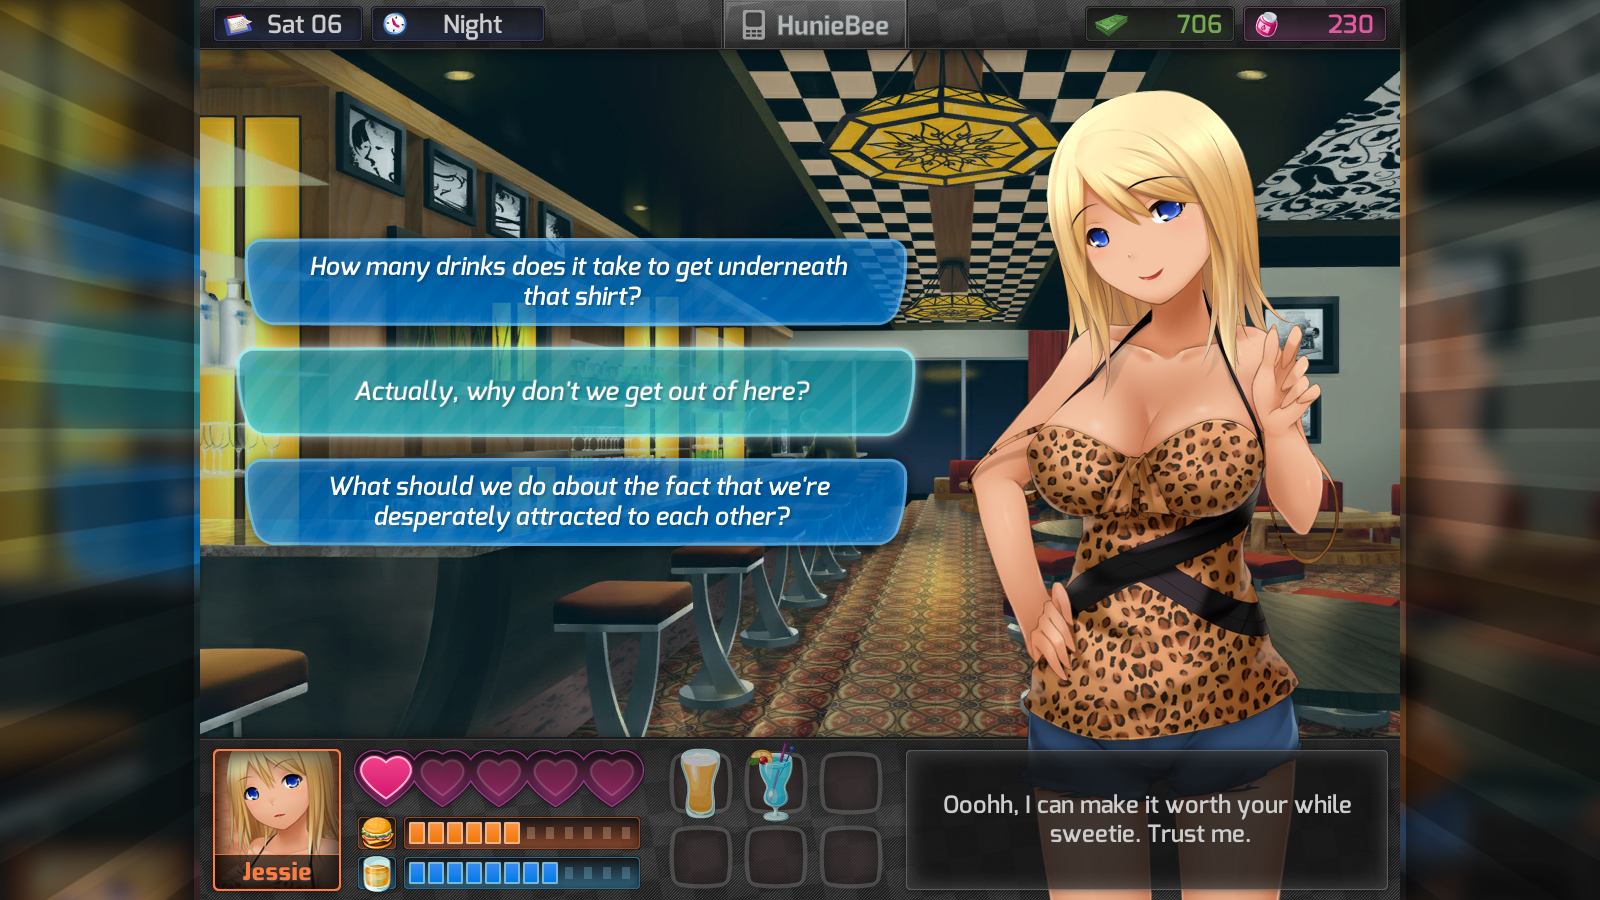 huniepop uncensored patch notes